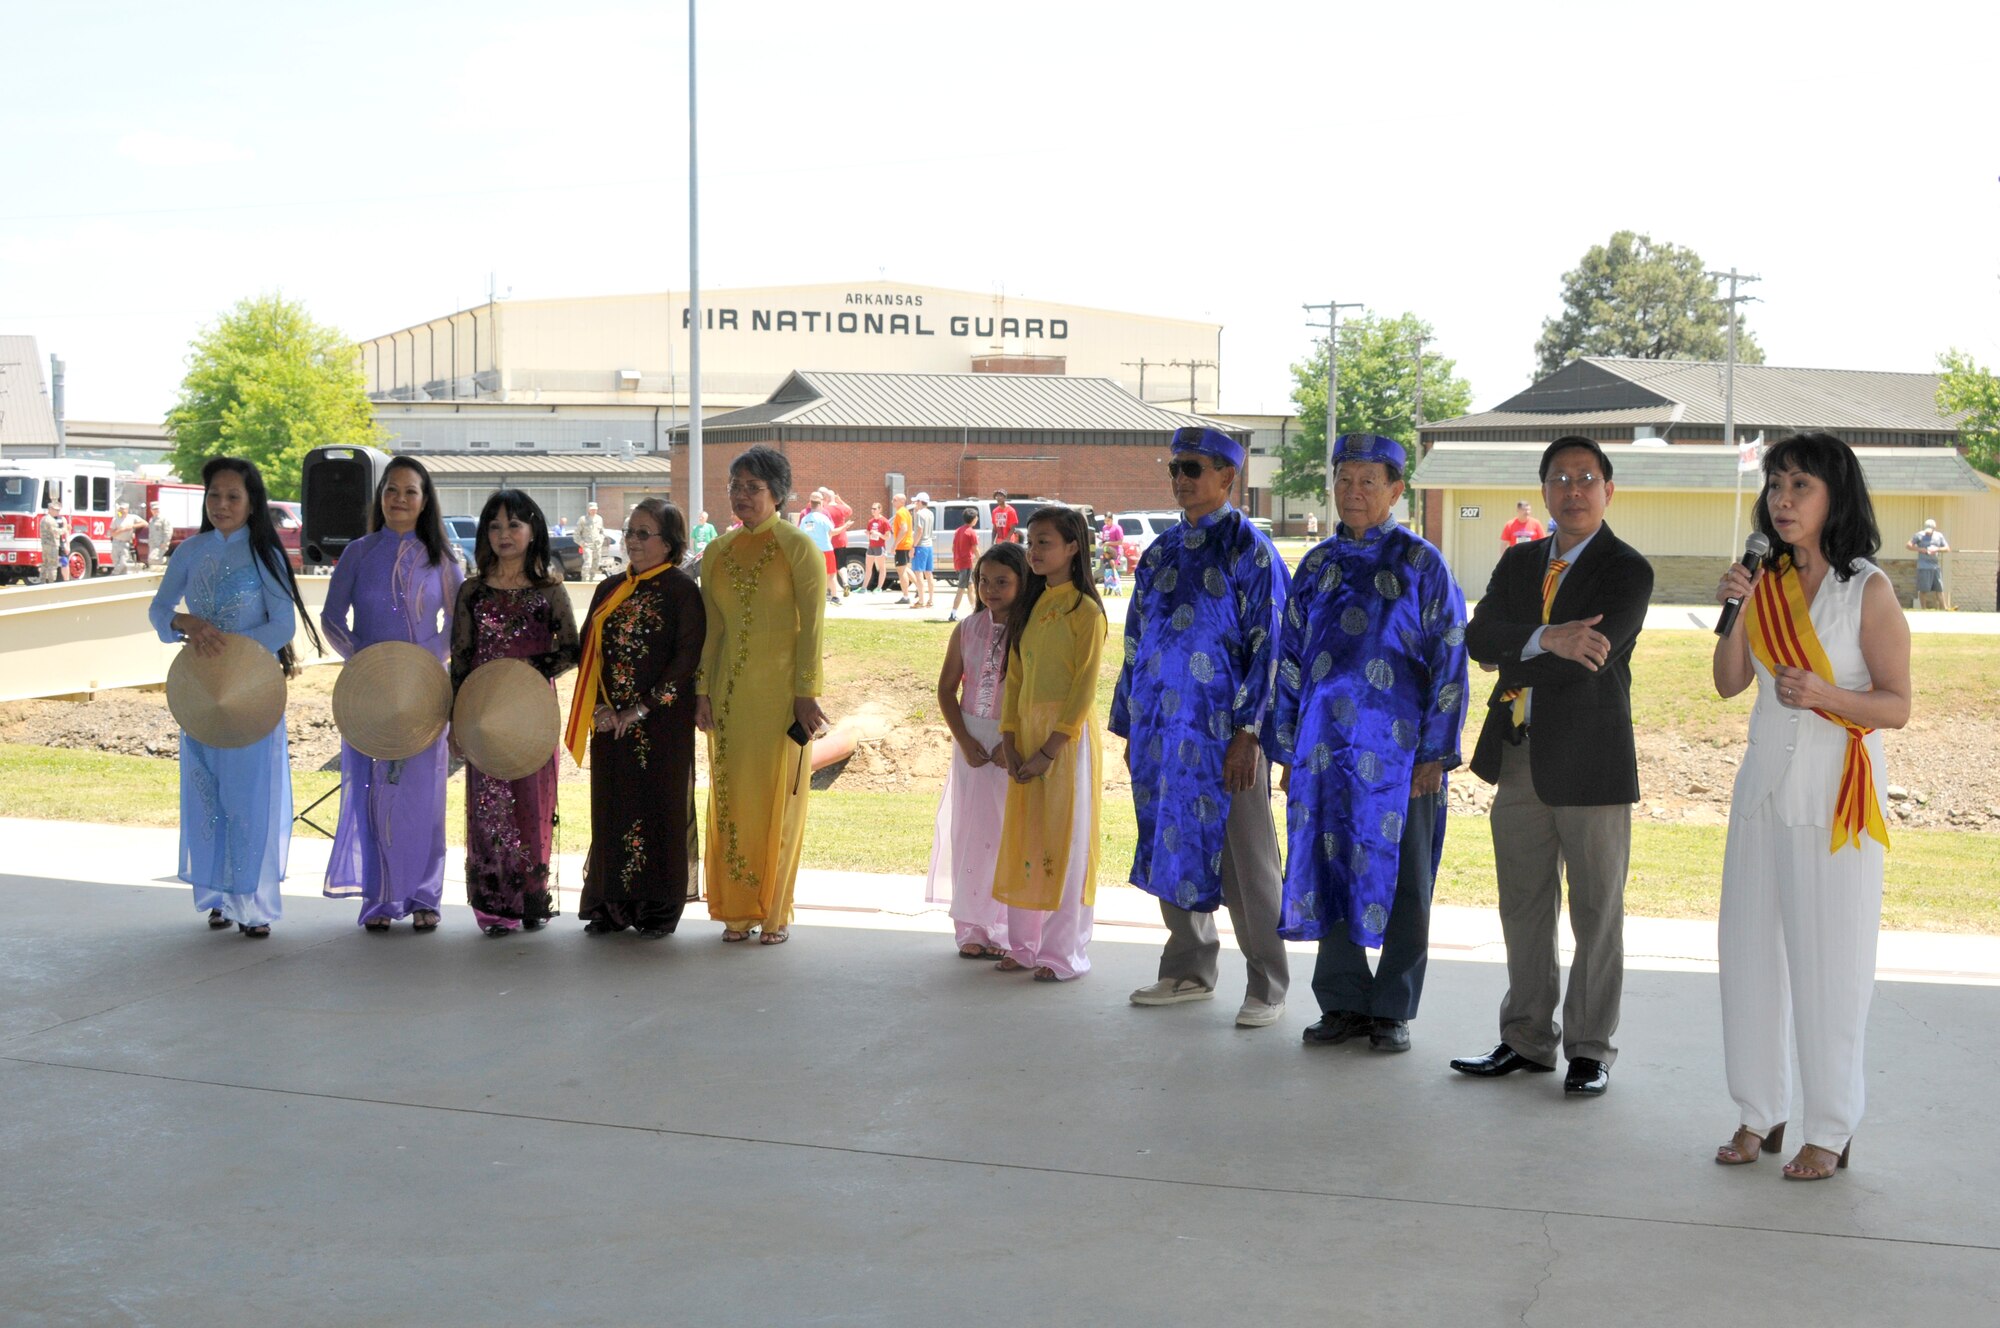 Members of the Vietnamese community in the Fort Smith, Arkansas area exhibit traditional cultural attire during an Asian American-Pacific Islander Heritage Month  event held May 2, 2015, as part of a Family Day hosted on Ebbing Air National Guard Base, Fort Smith, Ark. (U.S. Air National Guard photo by Staff Sgt. John Suleski/Released)